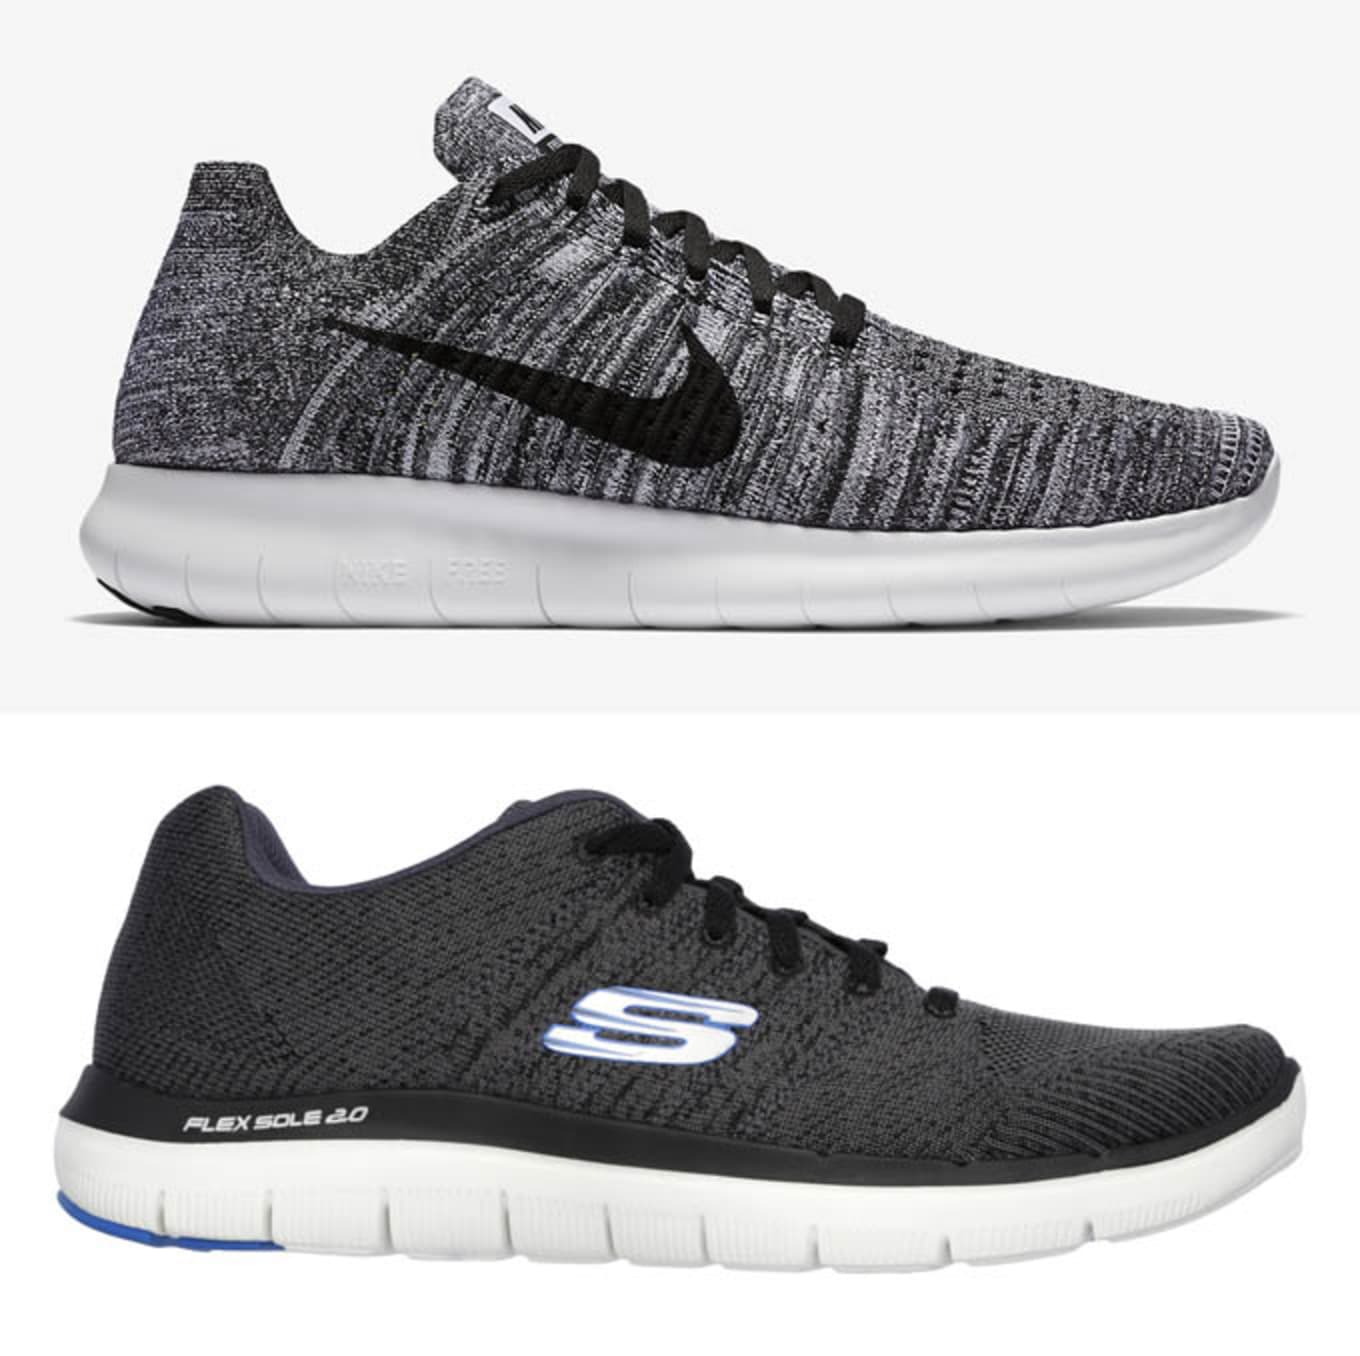 why does skechers copy everything